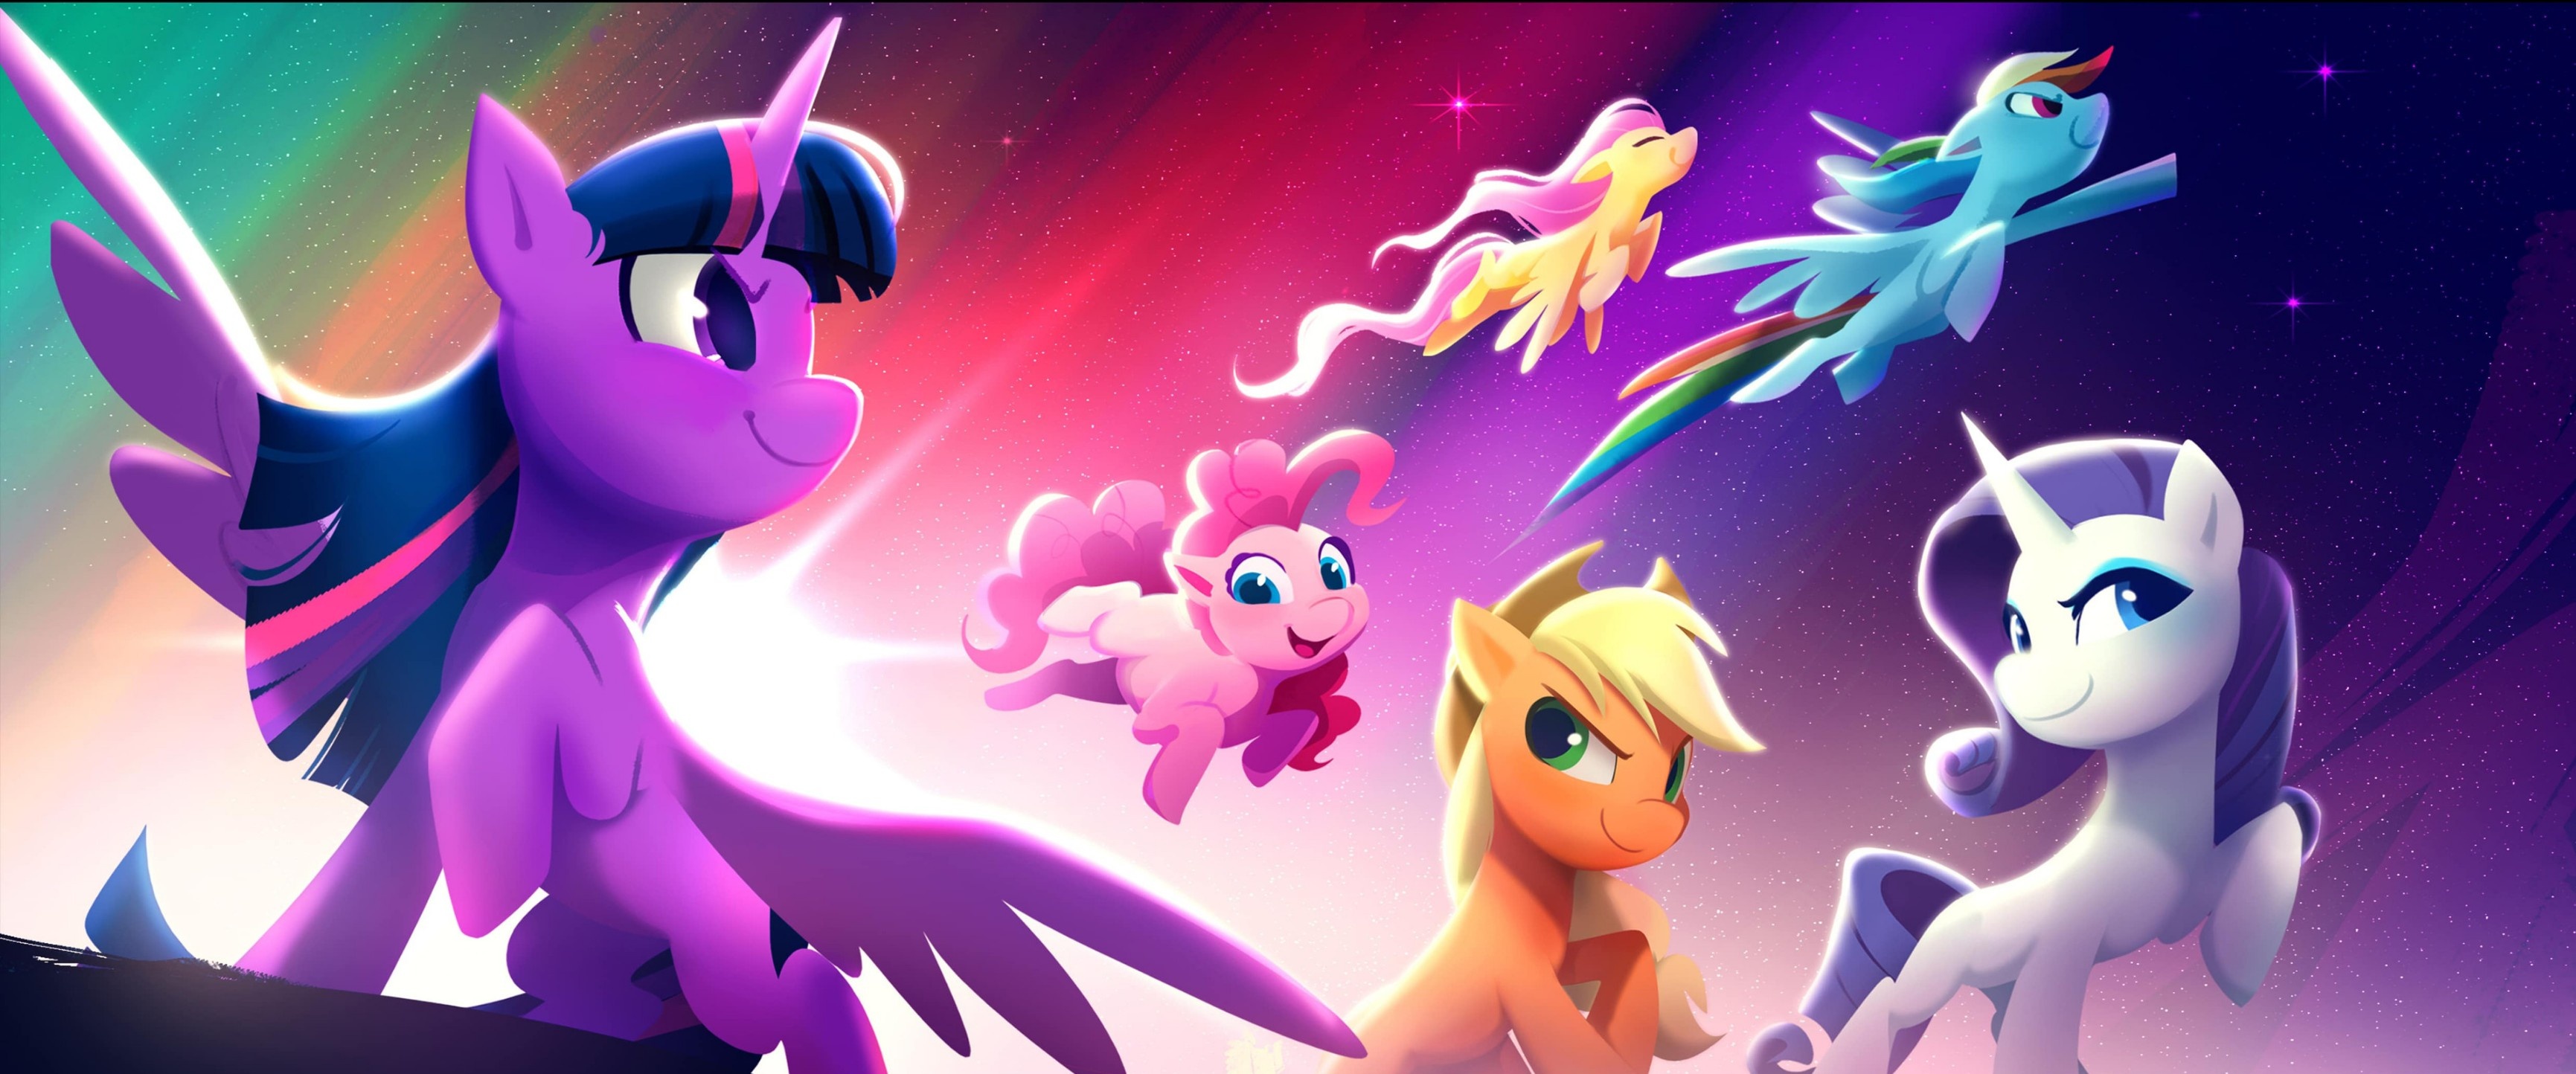 My Little Pony: A New Generation, HD wallpaper, Background image, Animated film, 3470x1450 Dual Screen Desktop